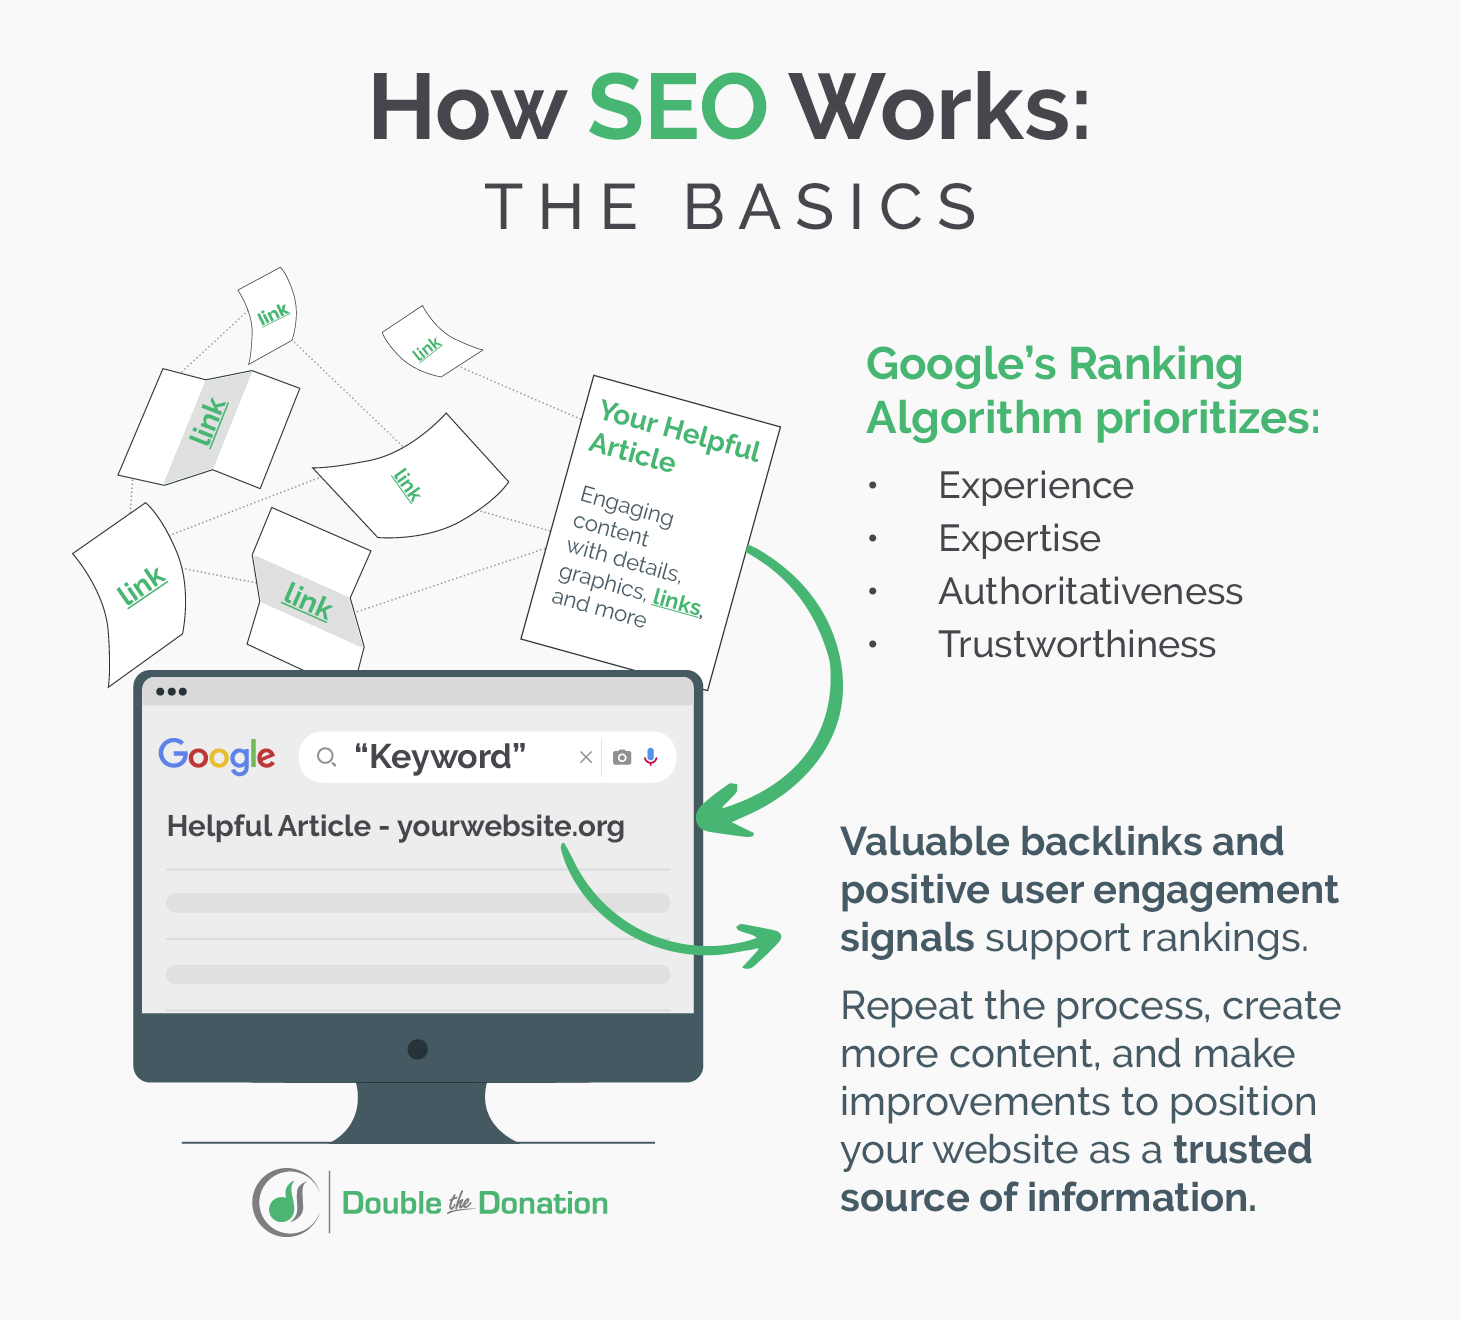 A depiction of how SEO works, explained above